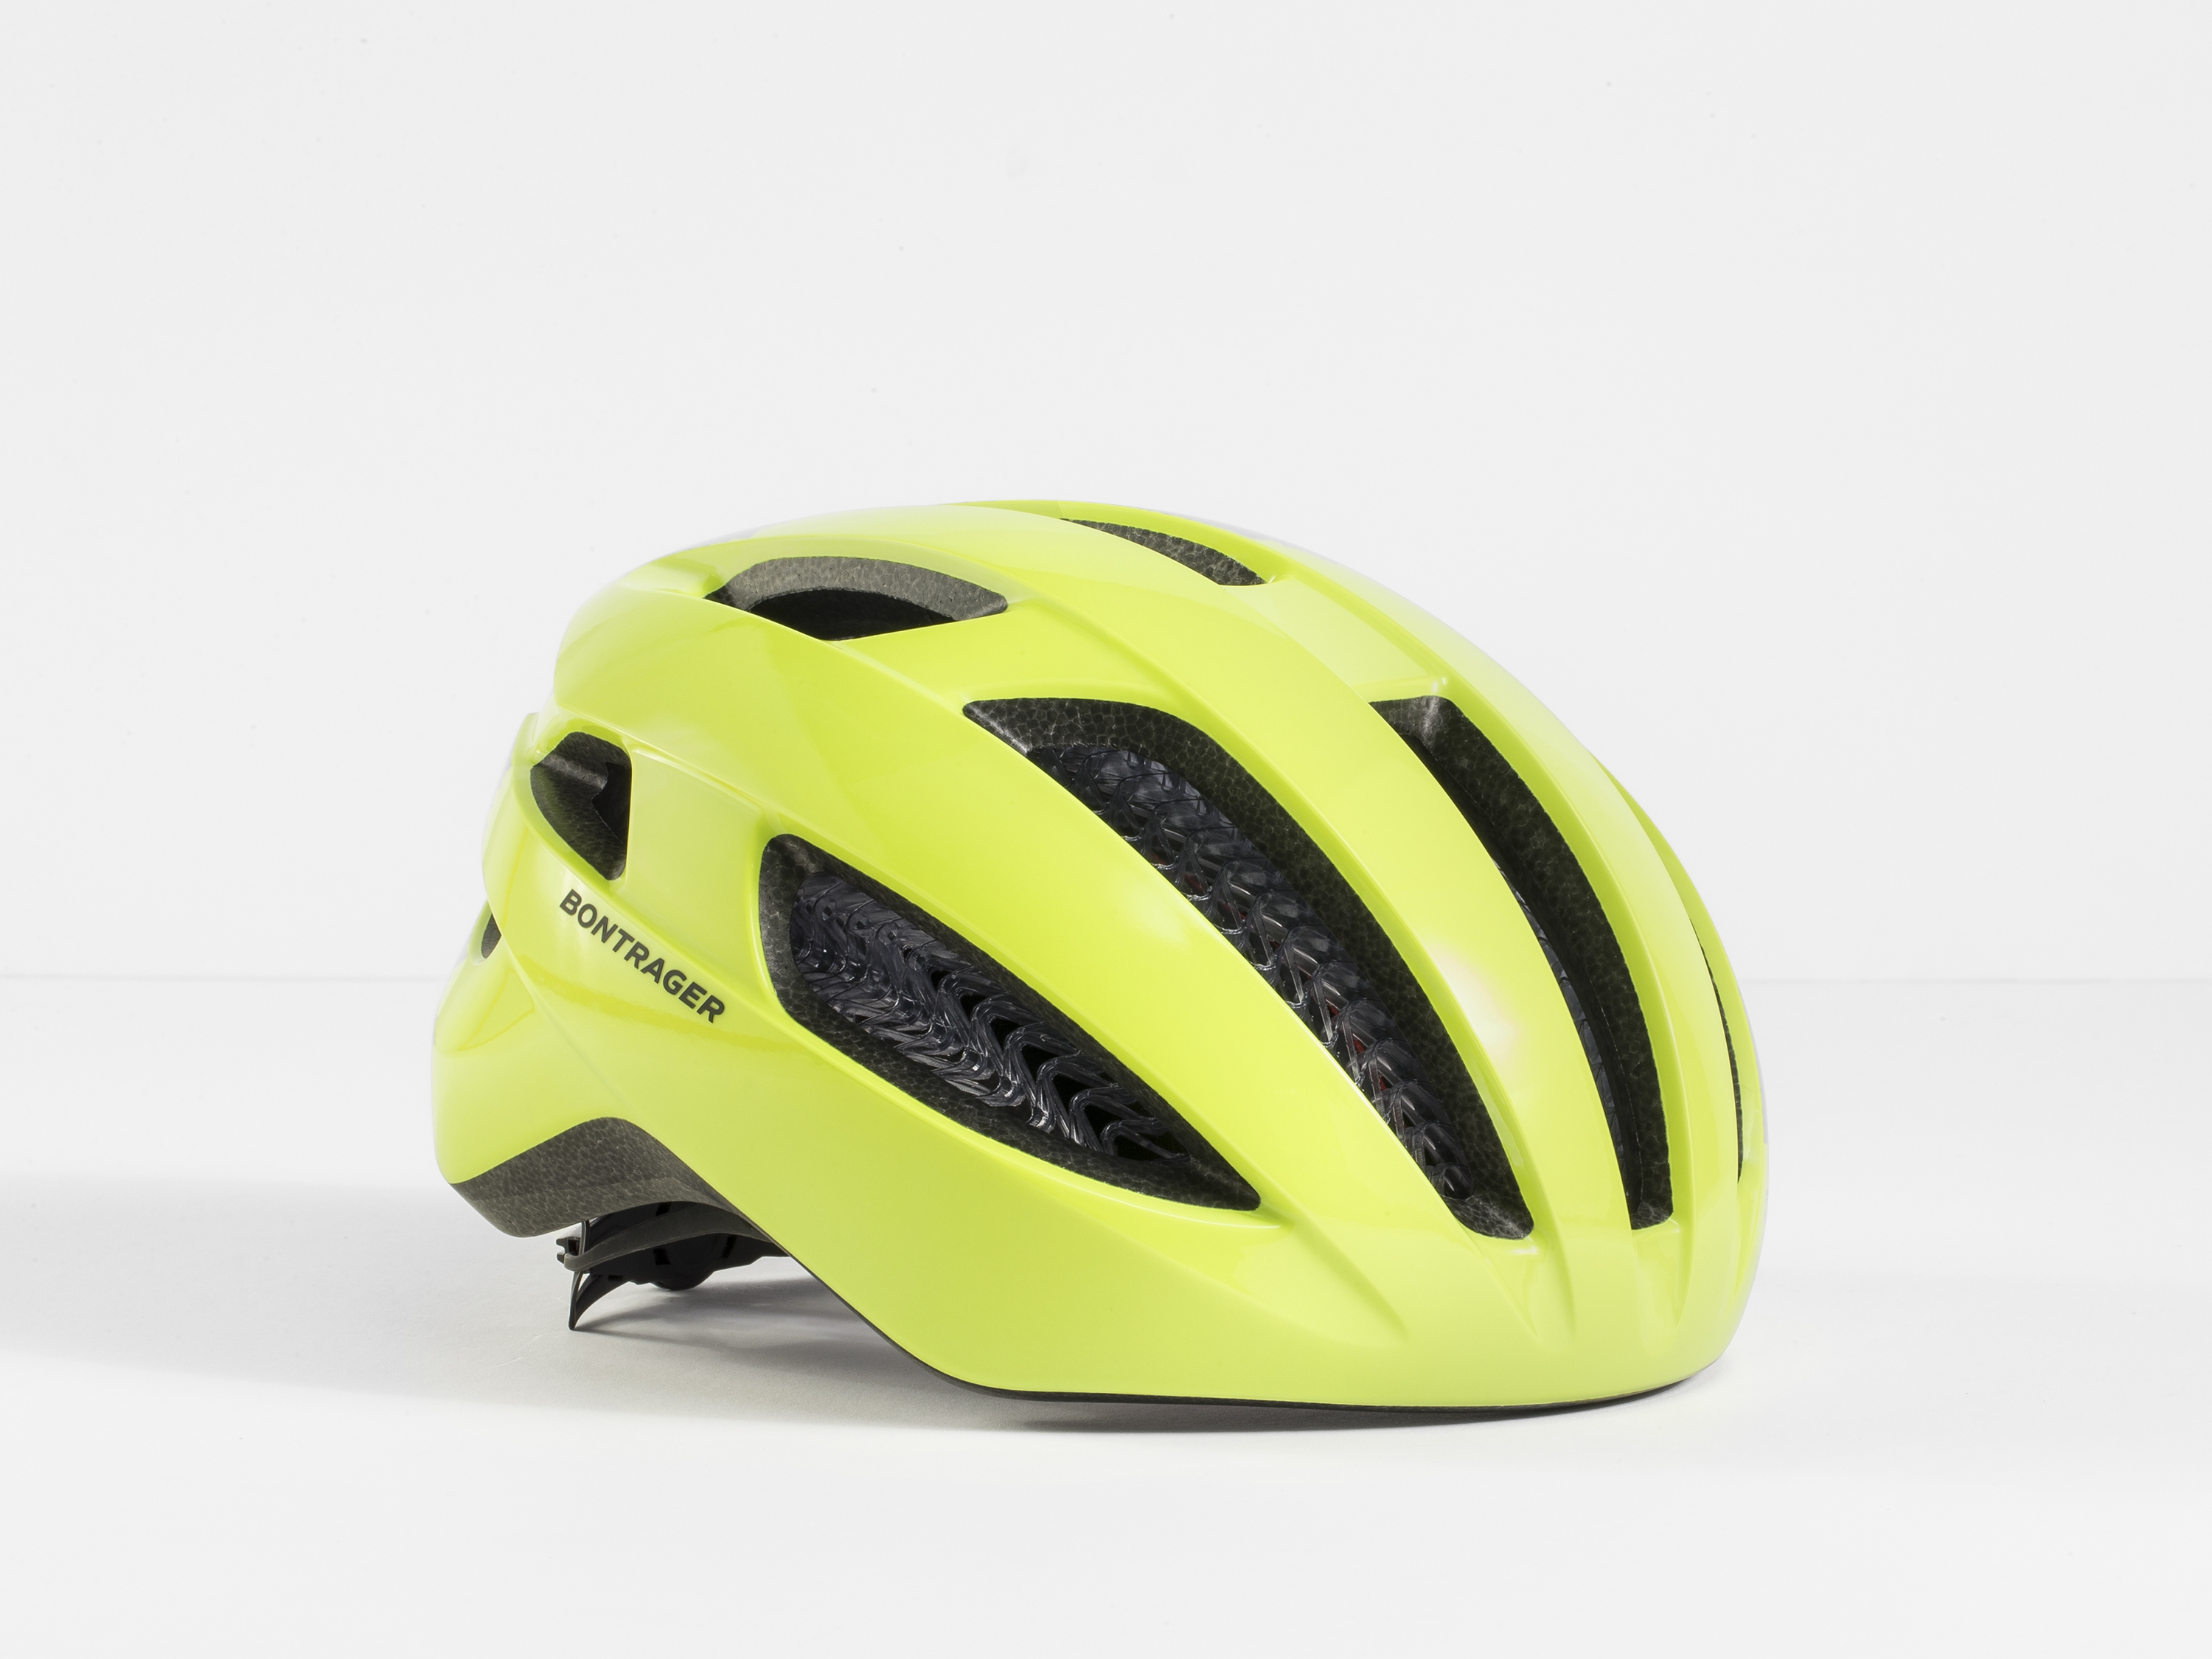 <a href="https://cycles-clement.be/product/bont-casque-starvos-wavecel-m-radioactive-yel/">BONT CASQUE  STARVOS WAVECEL M RADIOACTIVE YEL</a>